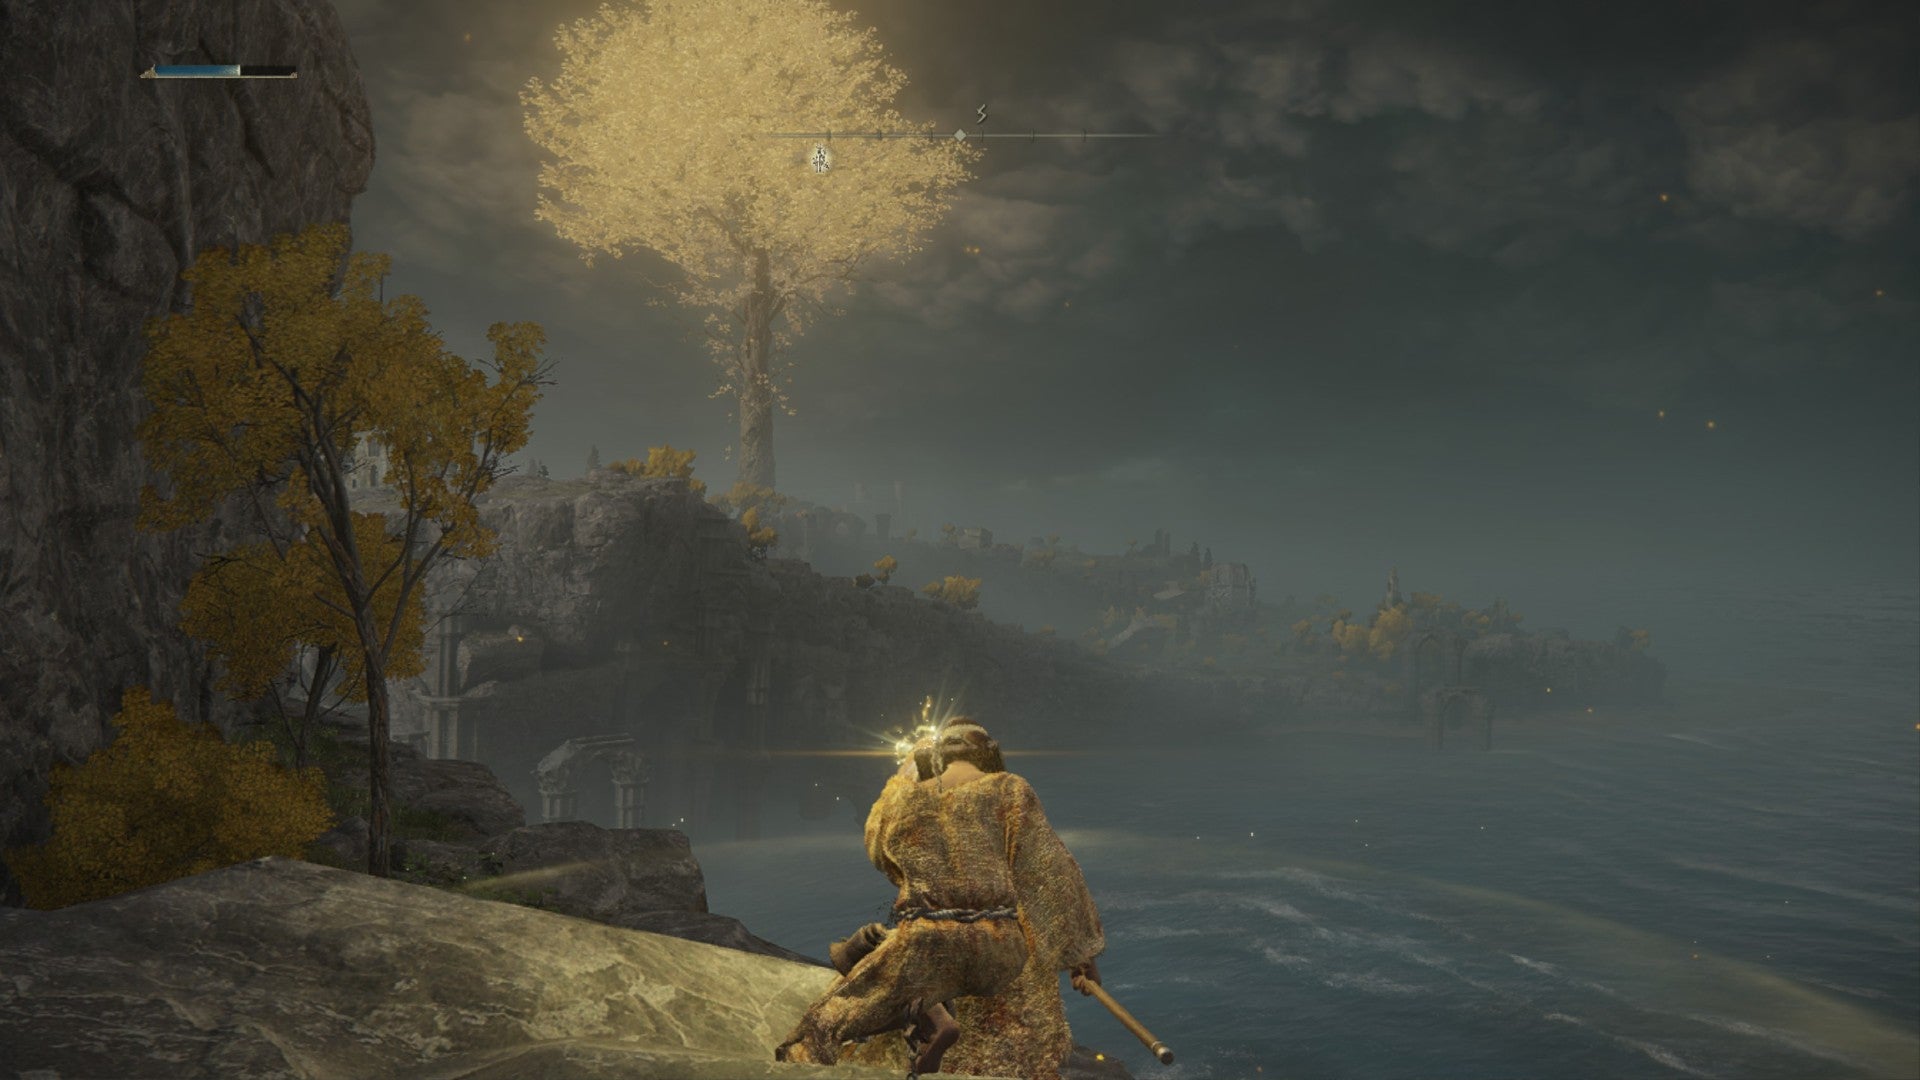 Elden Ring Prophet healing on a cliff looking out over a minor erdtree